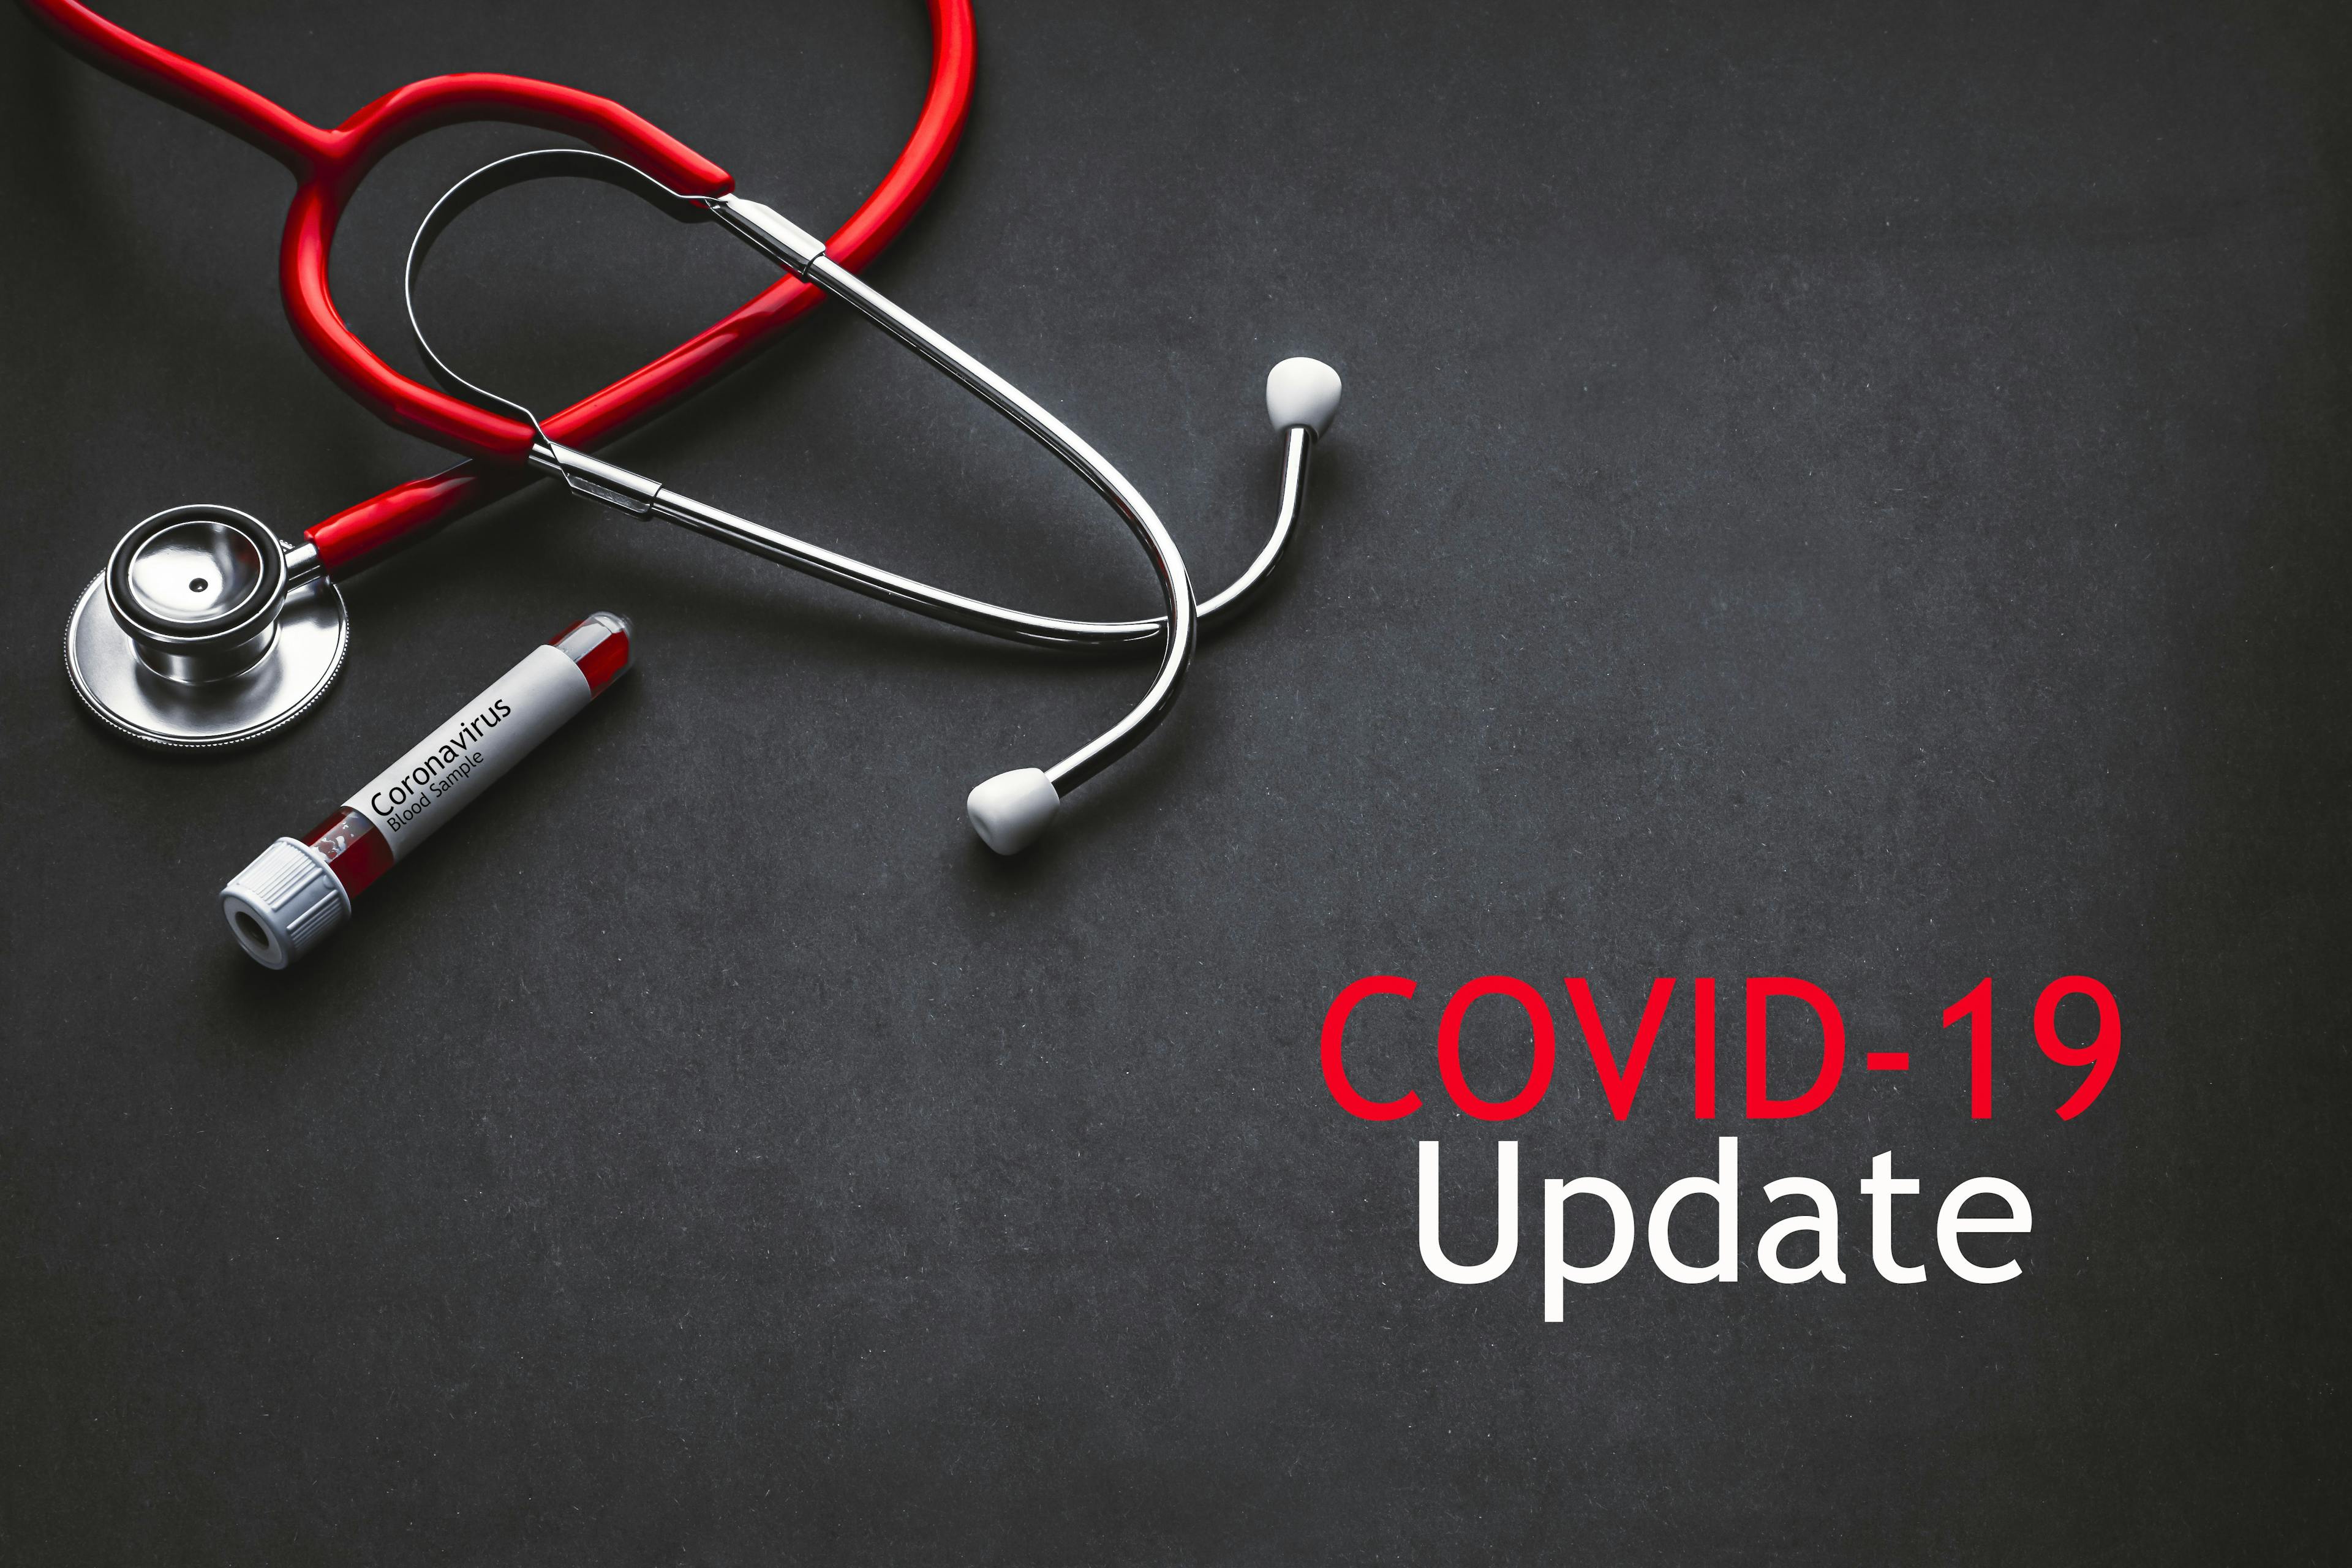 COVID-19 Update: Global Cases and Recoveries as of May 18, 2020